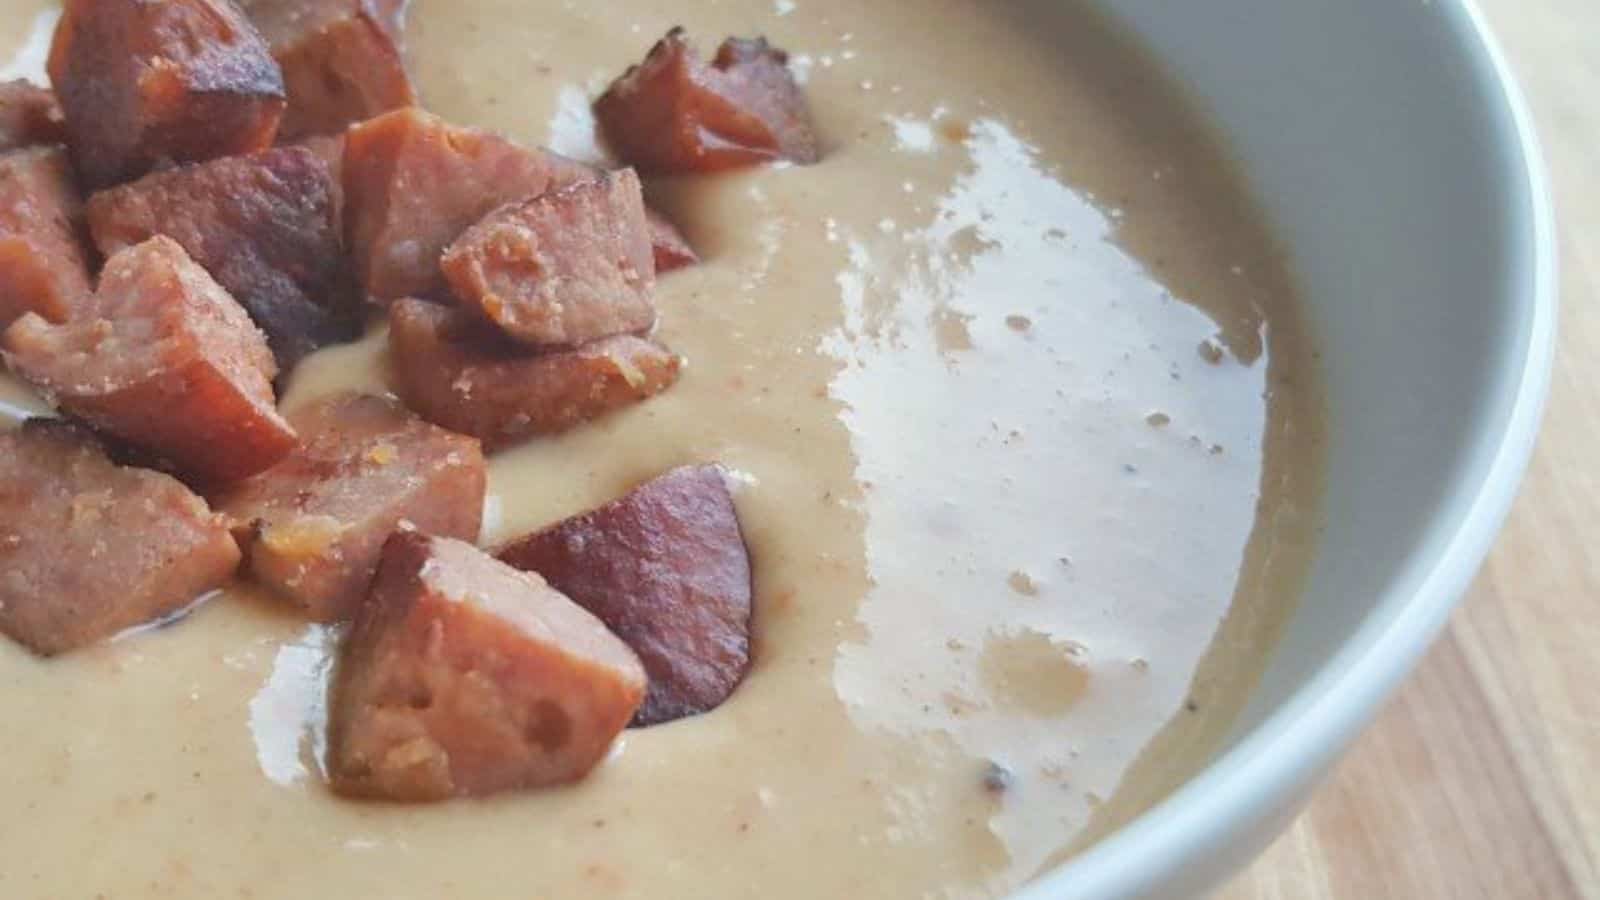 Image shows a closeup of a bowl of cheese and sausage soup with chopped sausage on top.